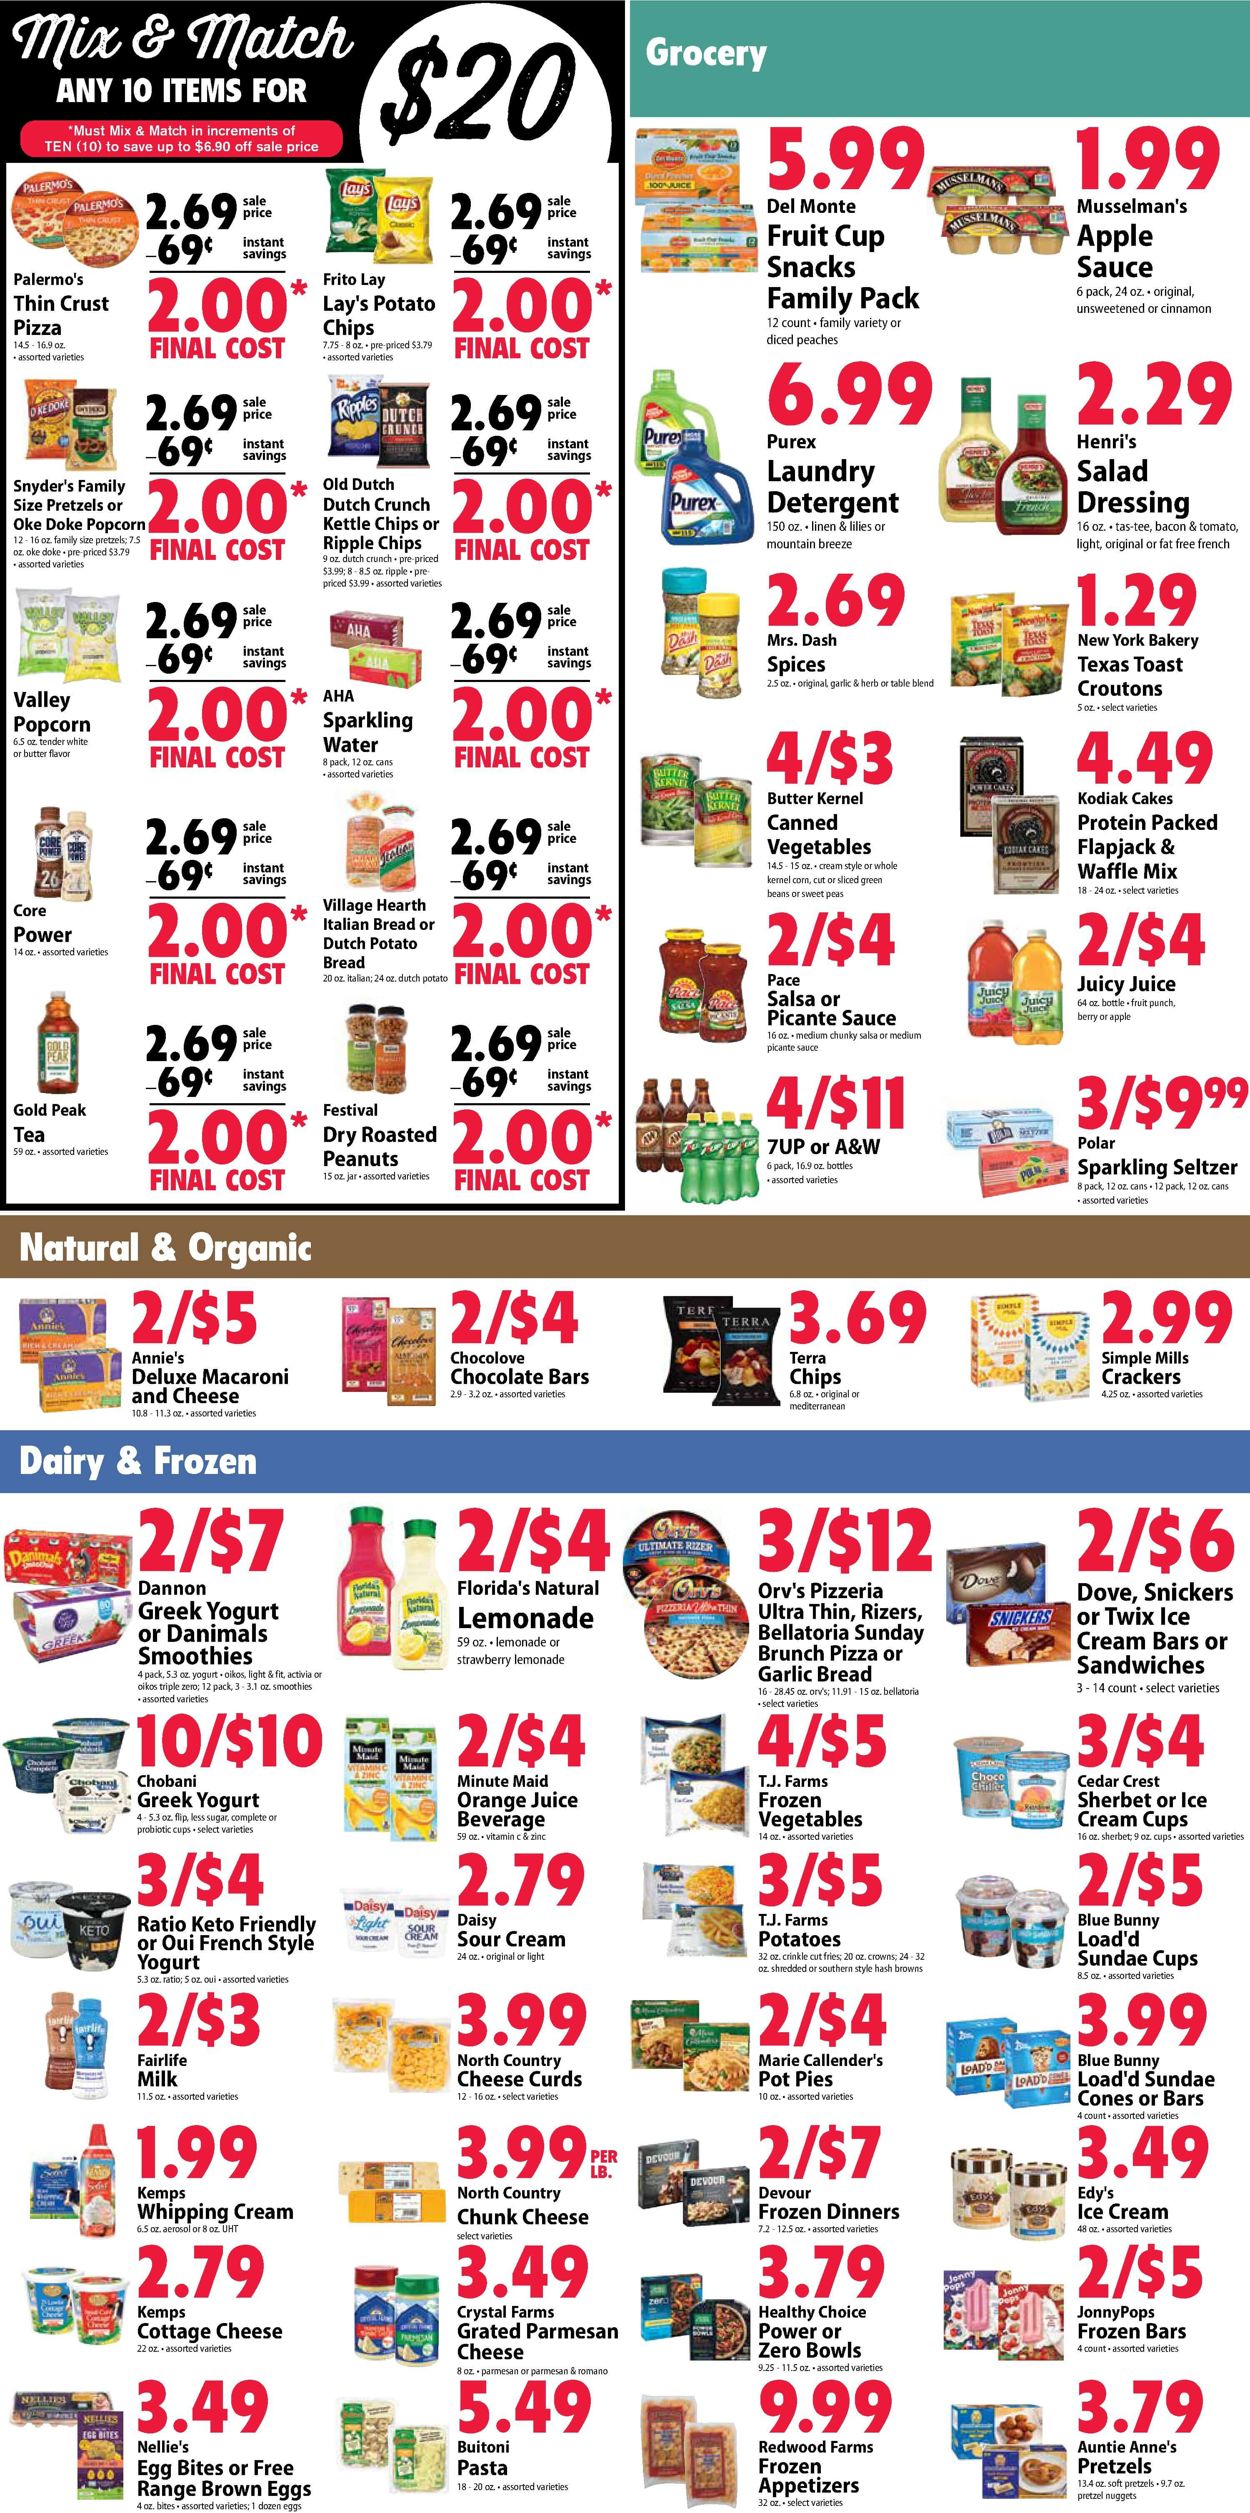 Festival Foods Current weekly ad 08/11 - 08/17/2021 [3] - frequent-ads.com